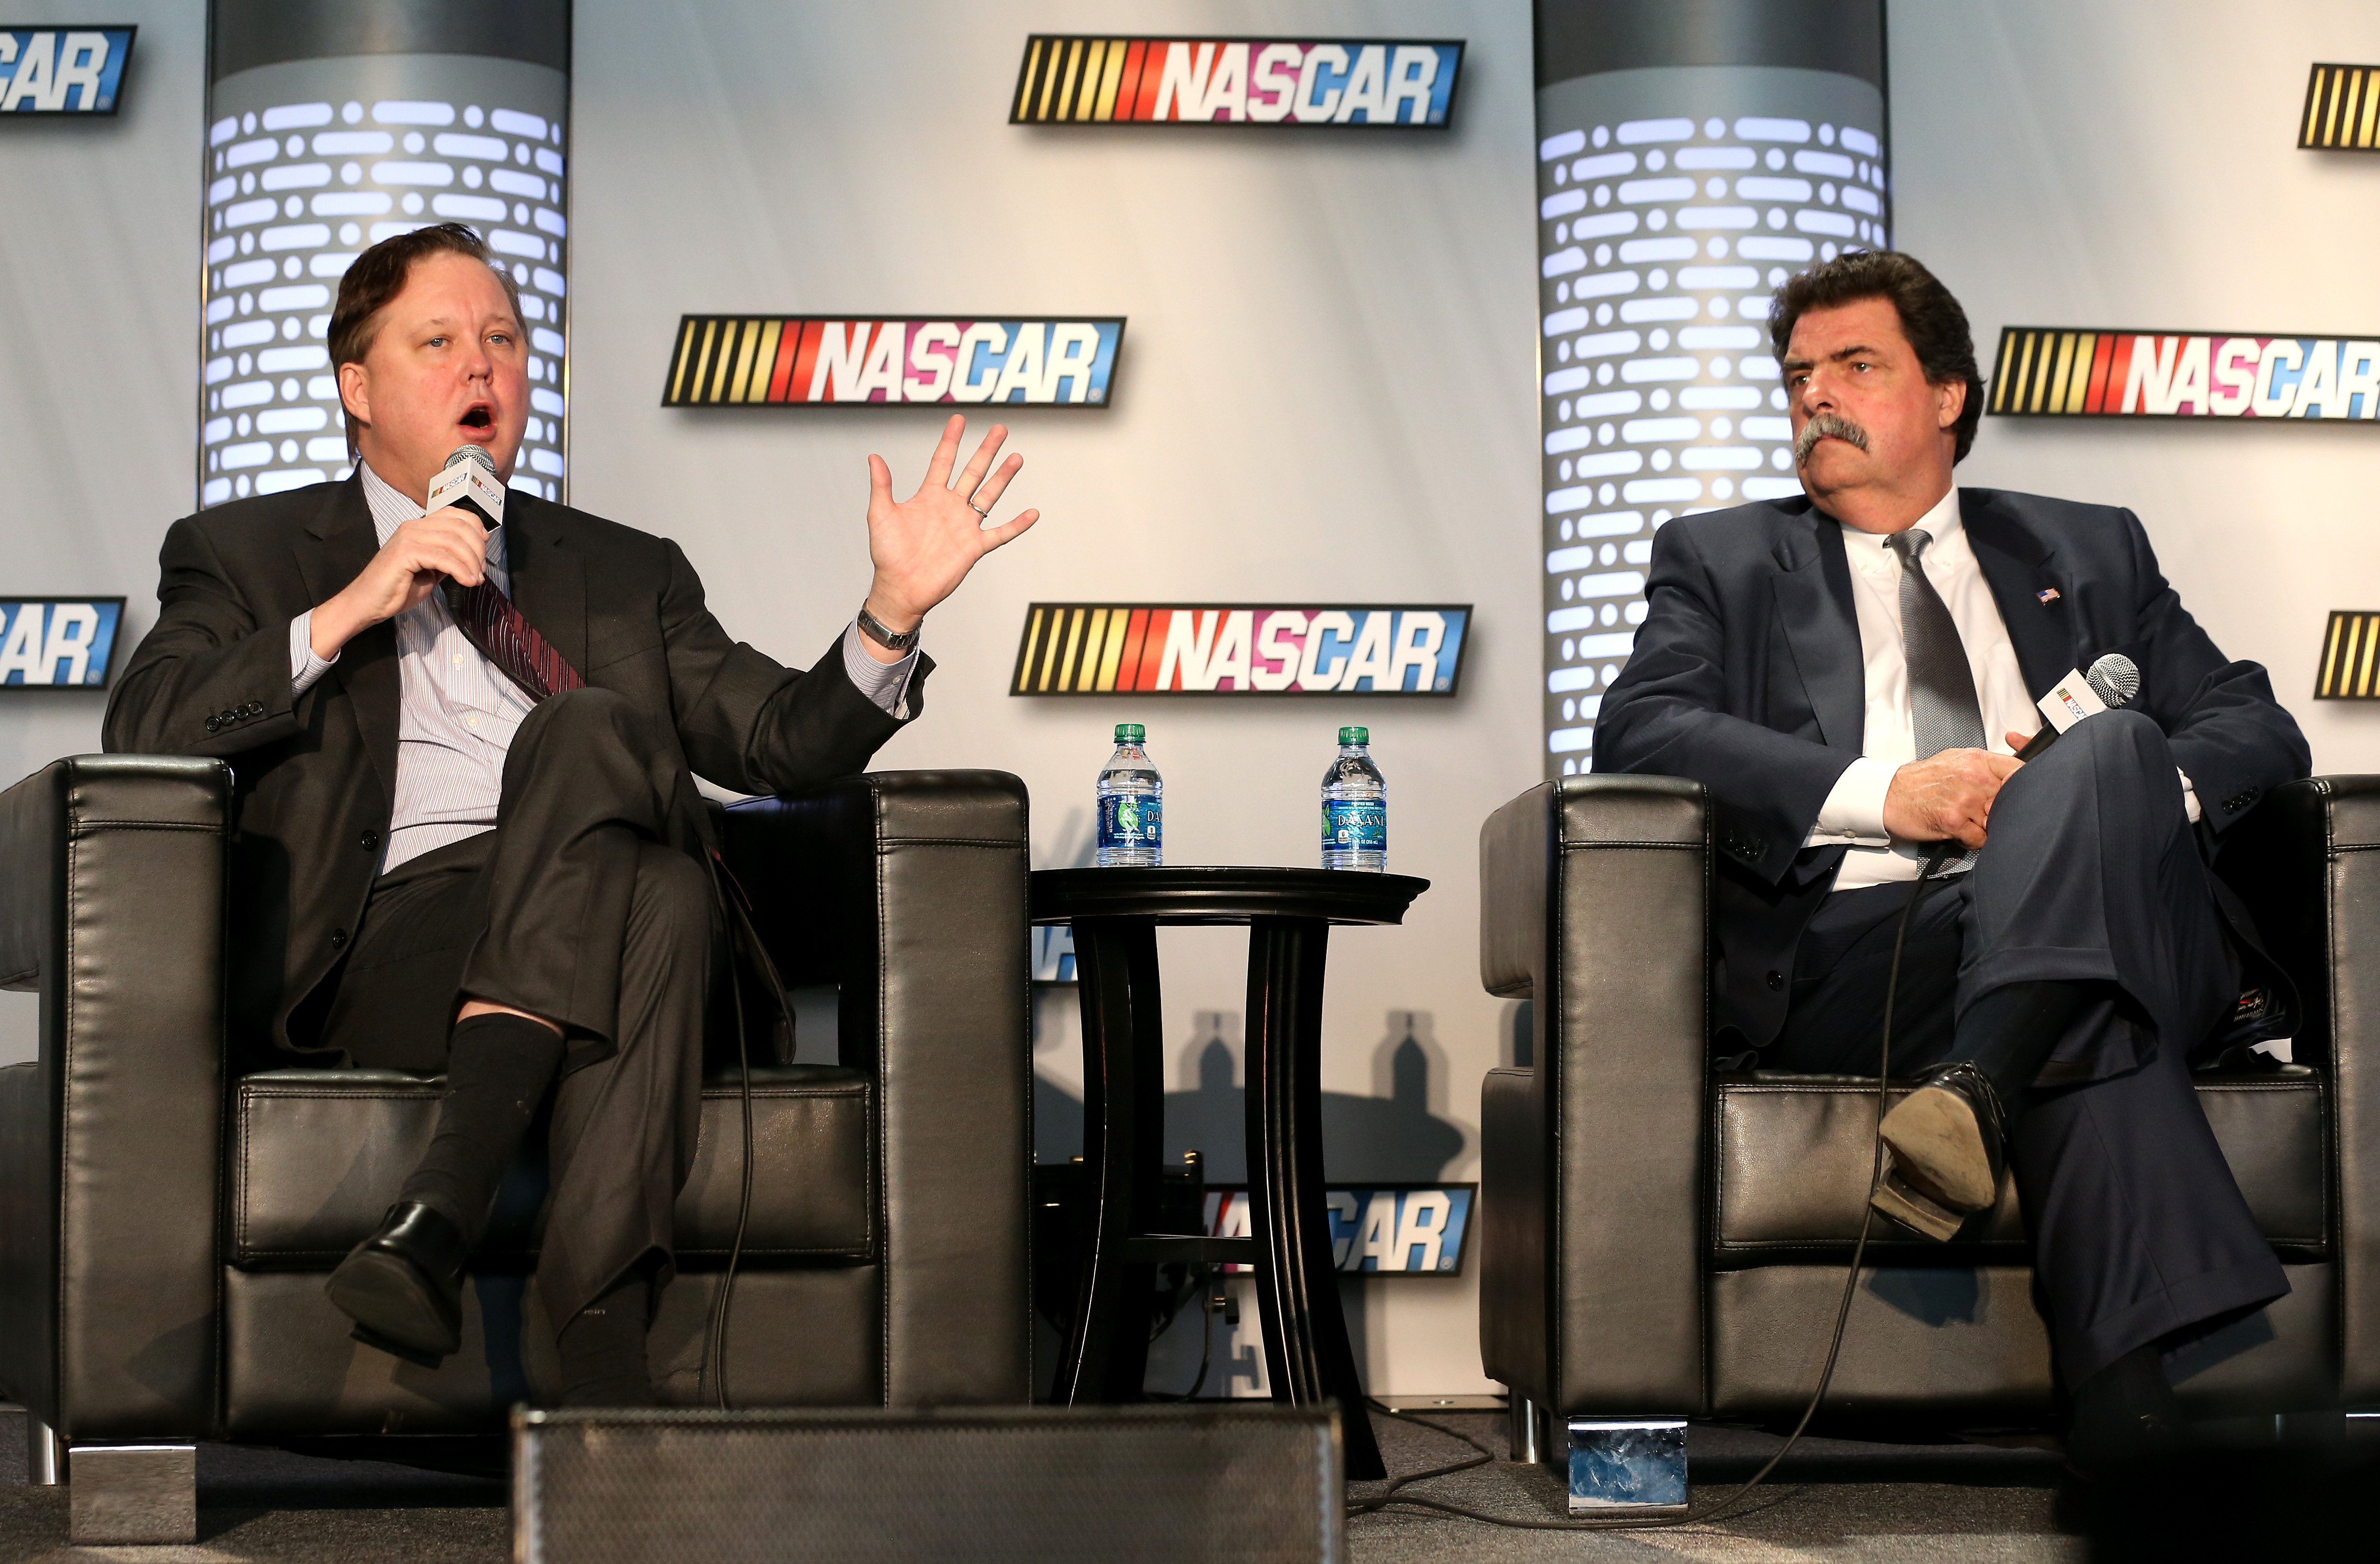 CONCORD, NC - JANUARY 22: (L-R) Brian France, NASCAR Chairman and CEO, and Mike Helton, President of NASCAR, speak to the media about the upcoming season during the 2013 NASCAR Sprint Media Tour at the NASCAR Hall of Fame on January 22, 2013 in Concord, North Carolina. (Photo by Streeter Lecka/Getty Images for NASCAR) | Getty Images